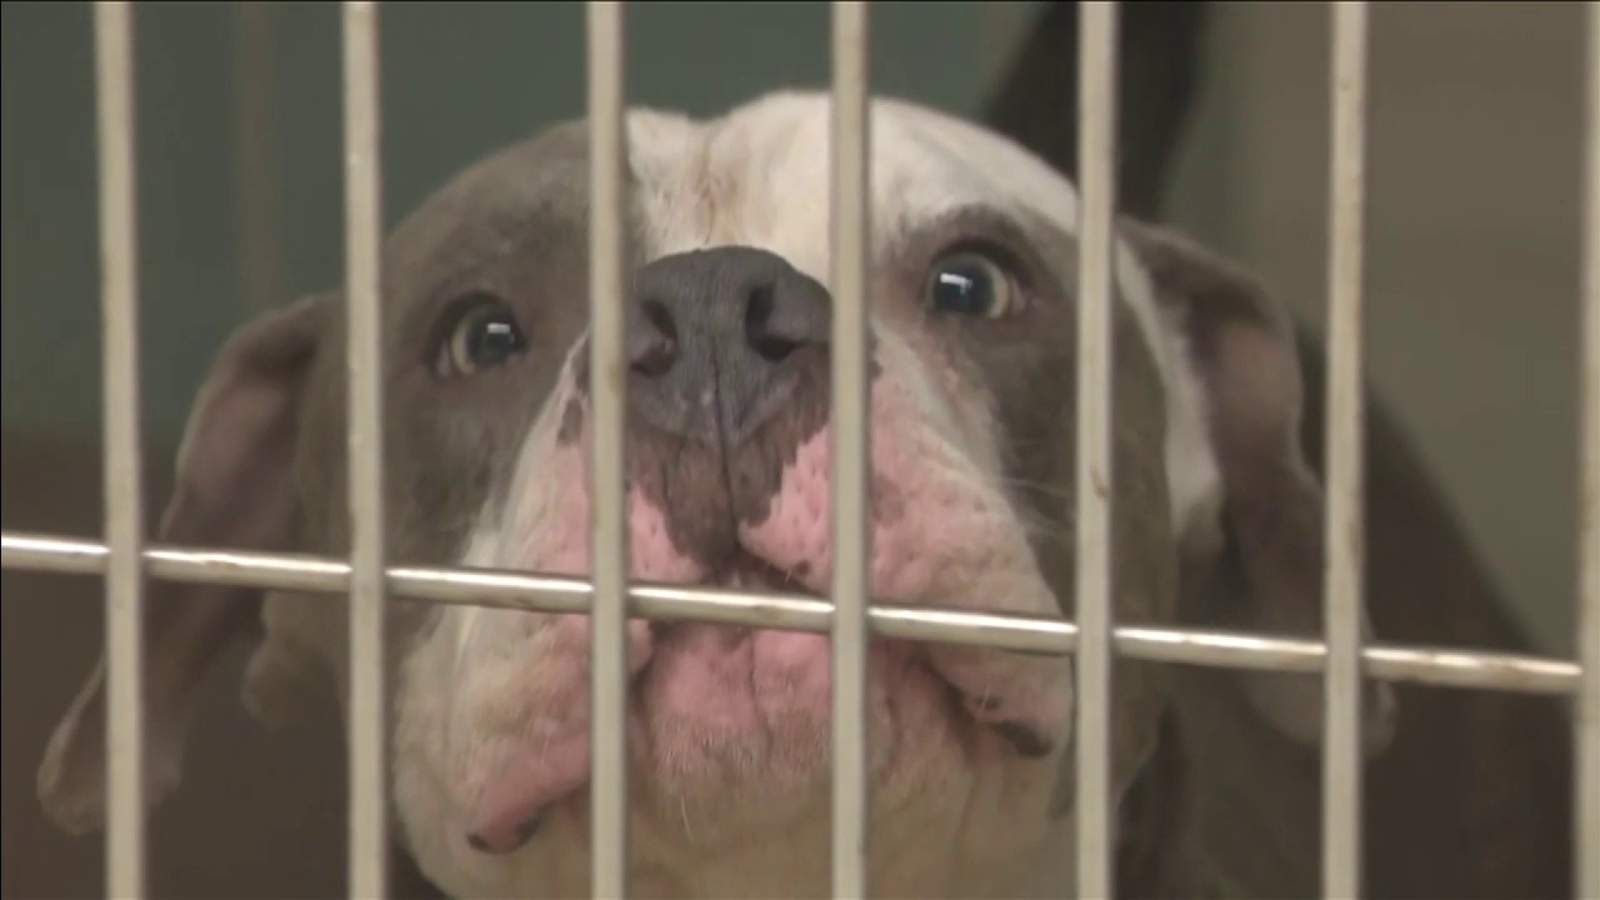 Broward County animal shelter failing, 208-page audit finds